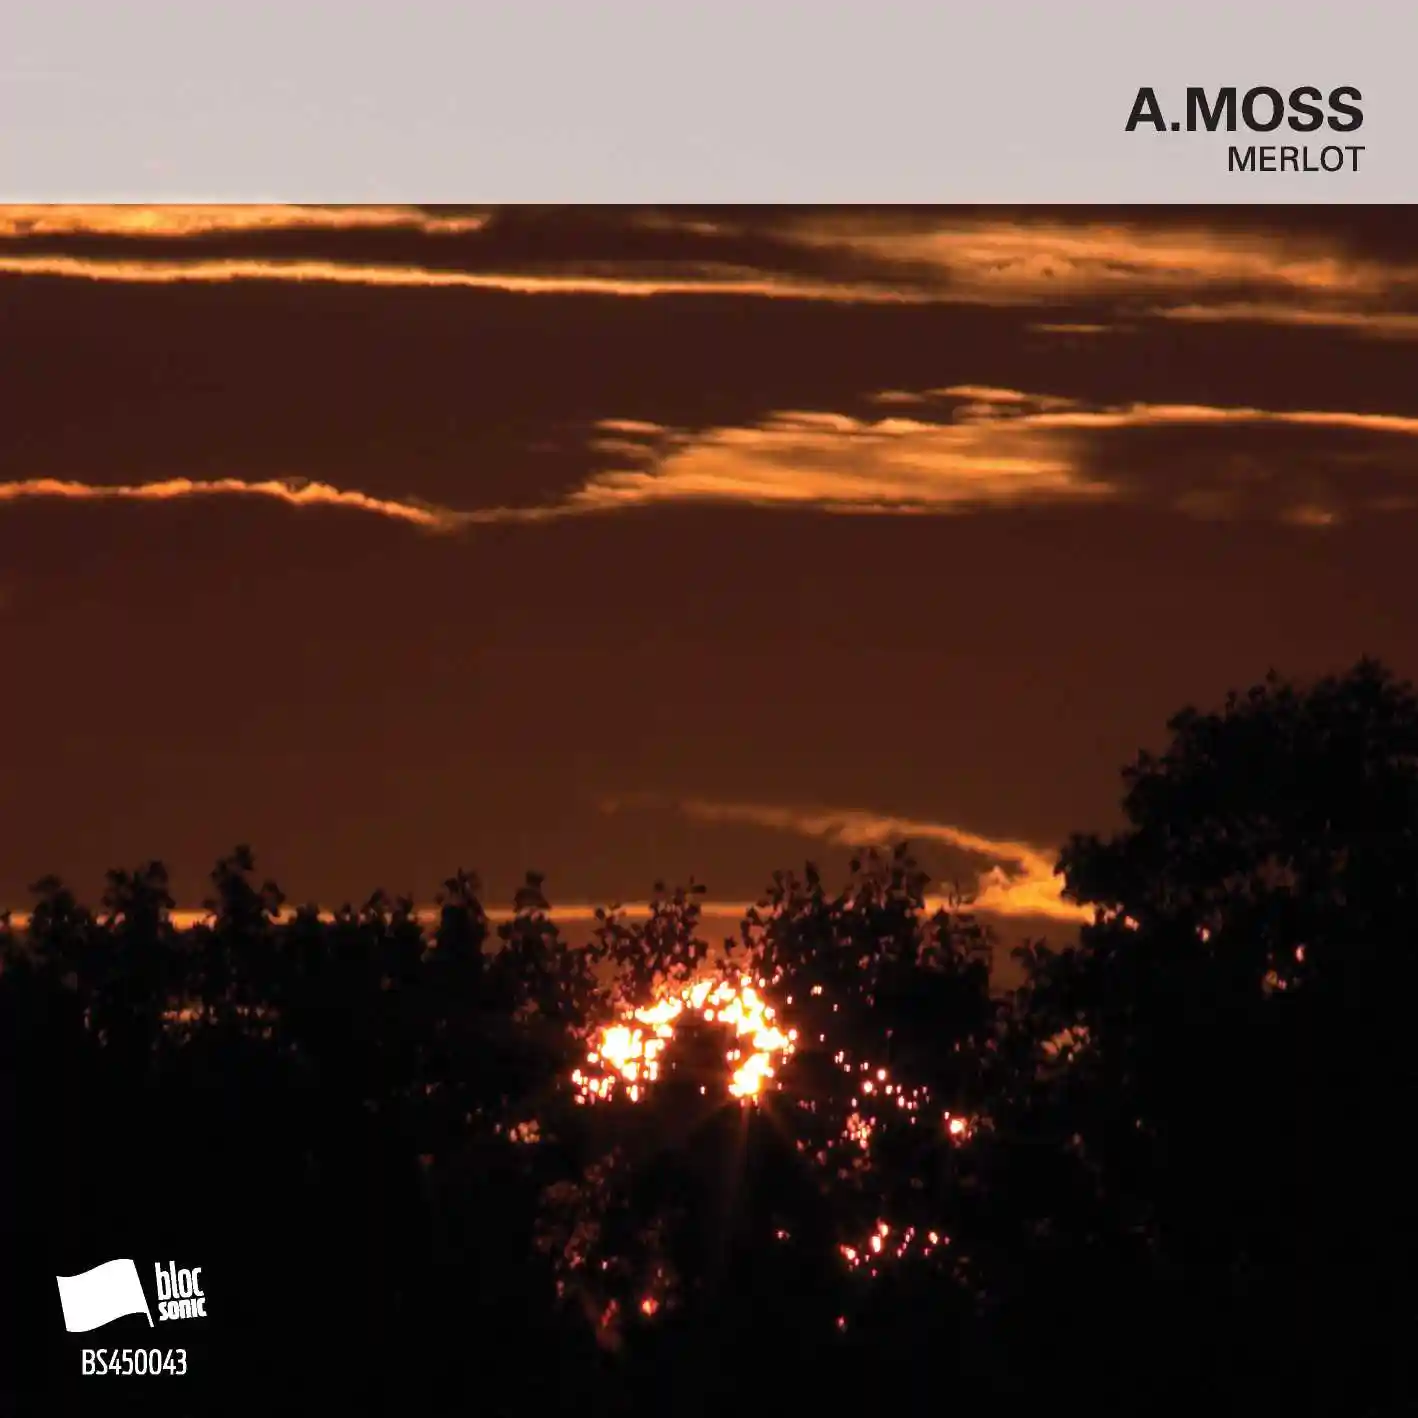 Album cover for “Merlot” by A.Moss